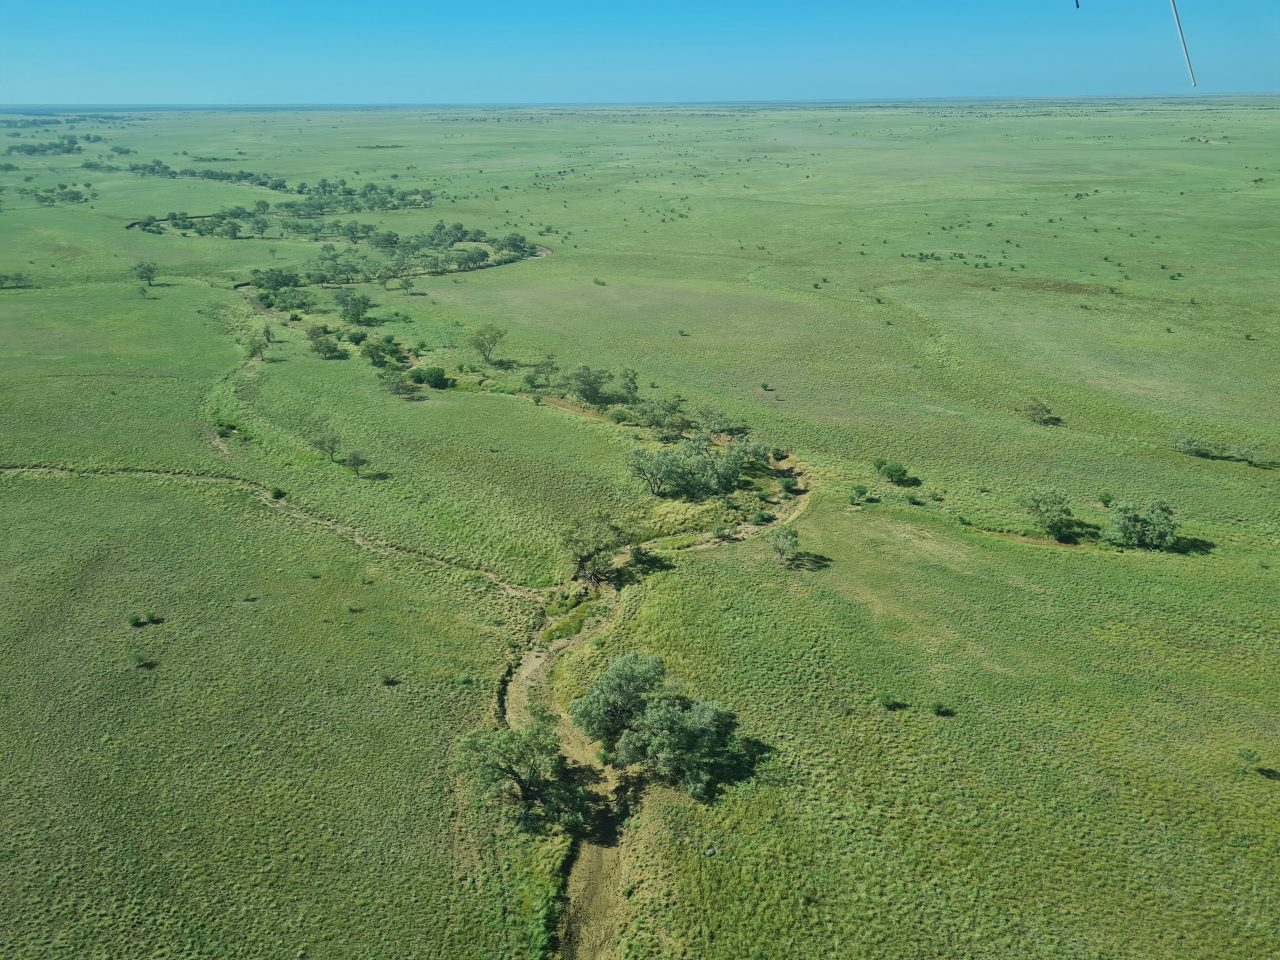 Aerial photo of vegetated green plains with a dry channel lined with trees meandering through the floodplain